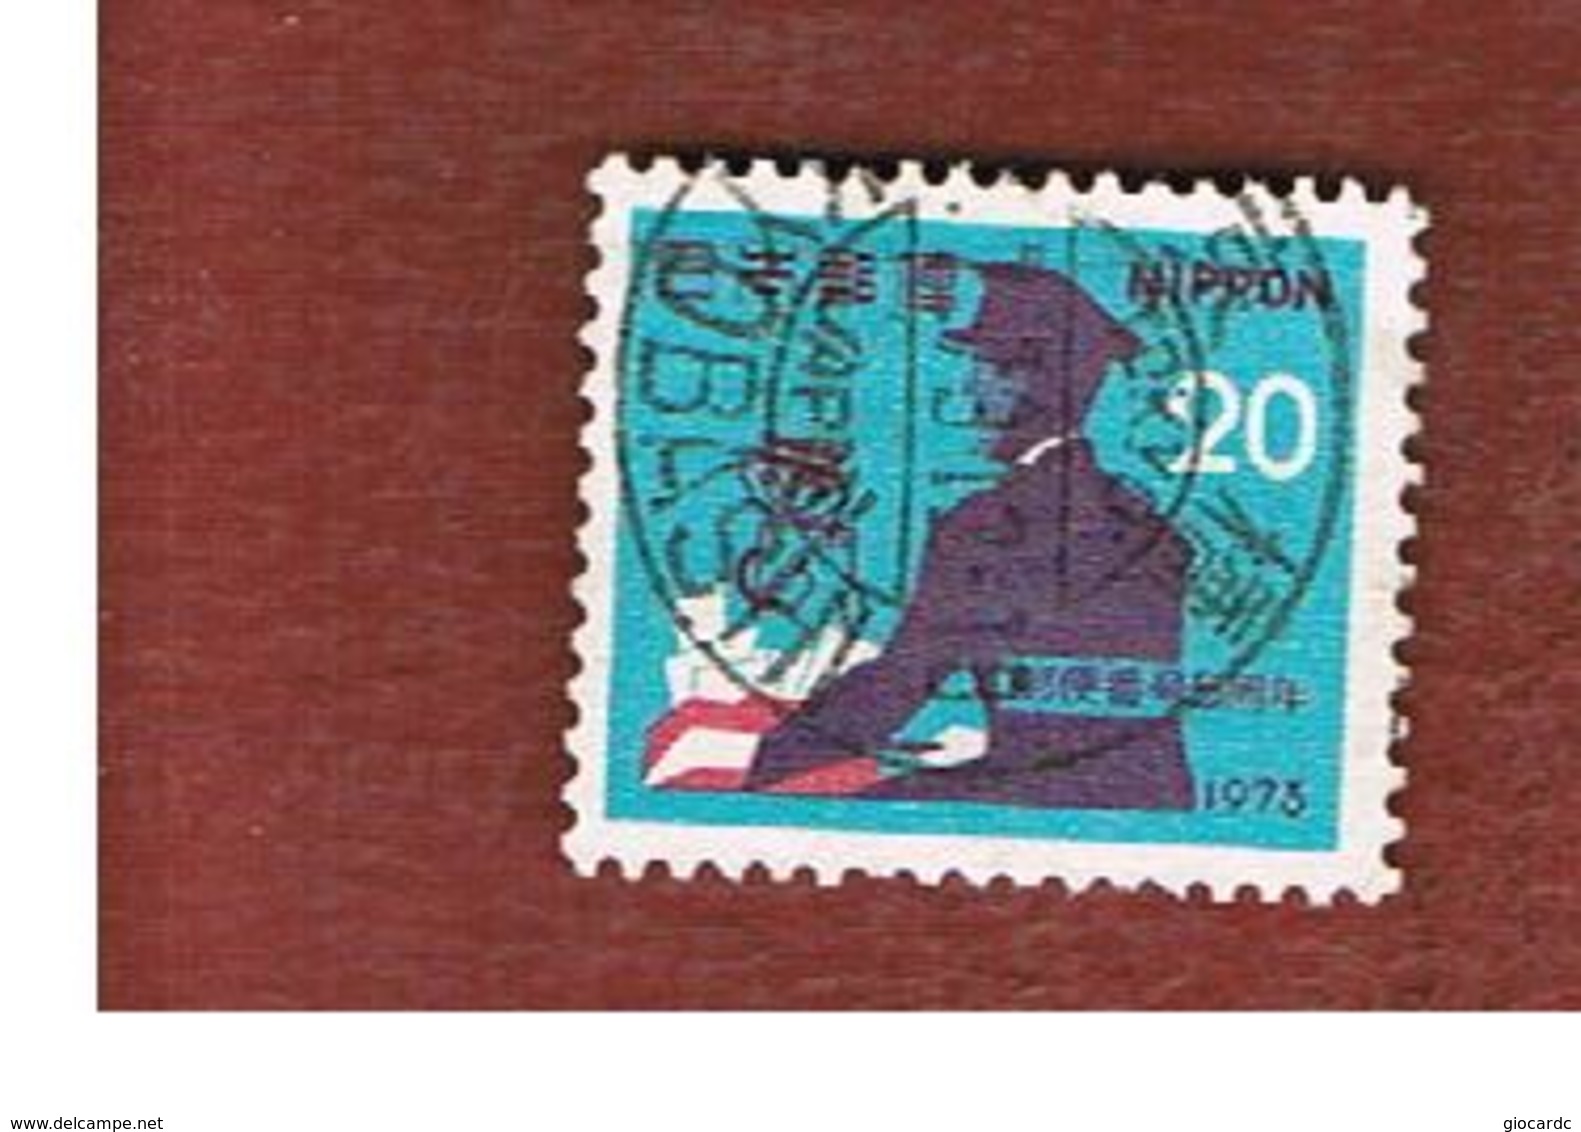 GIAPPONE  (JAPAN) - SG 1326  -   1973 POSTAL CODE CAMPAIGN - USED° - Usati